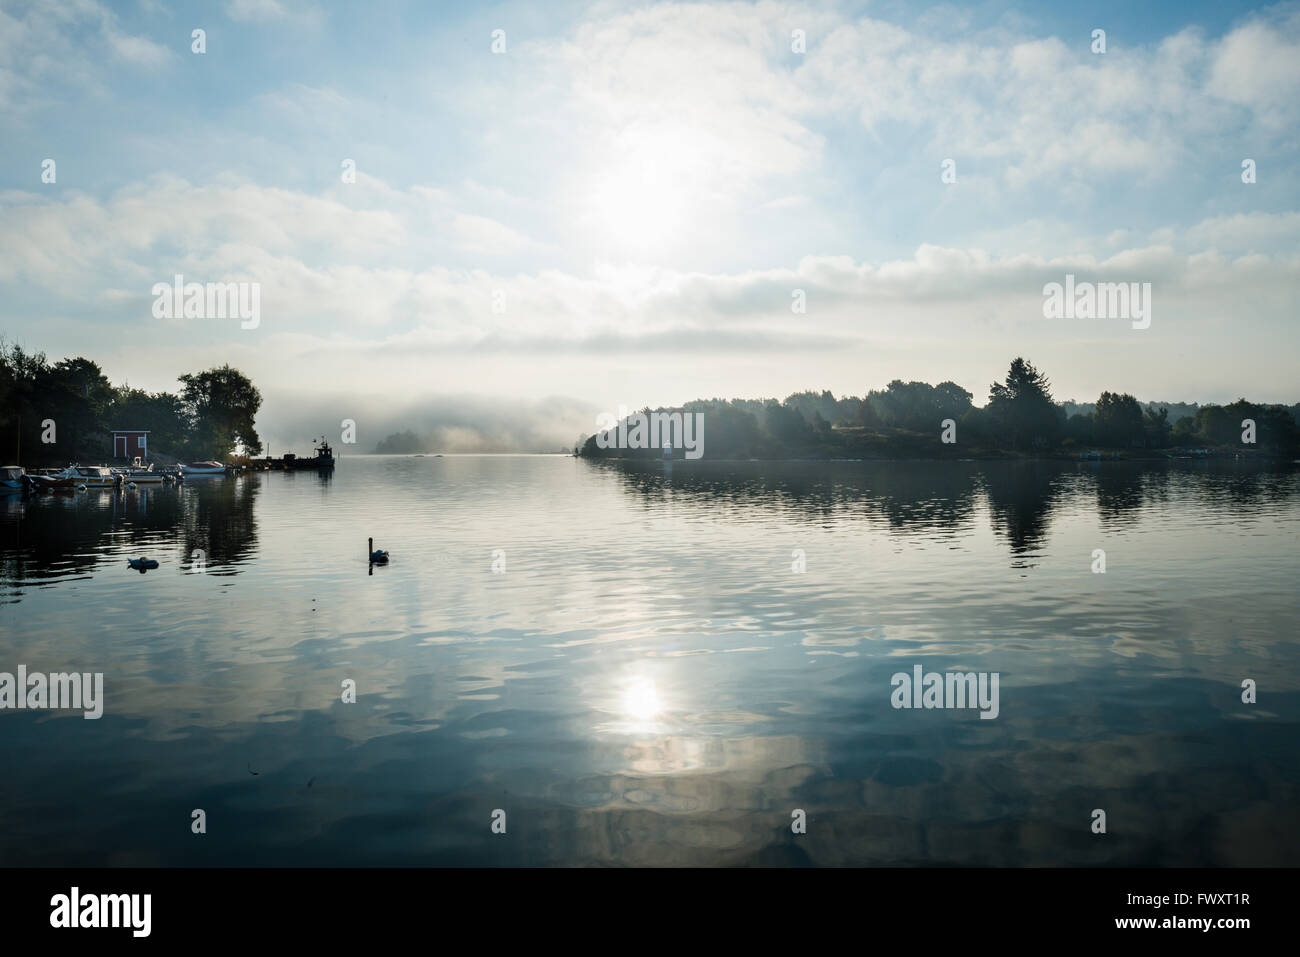 Sweden, Sodermanland, Gamla Oxelosund, Morning landscape with mute swam on water Stock Photo